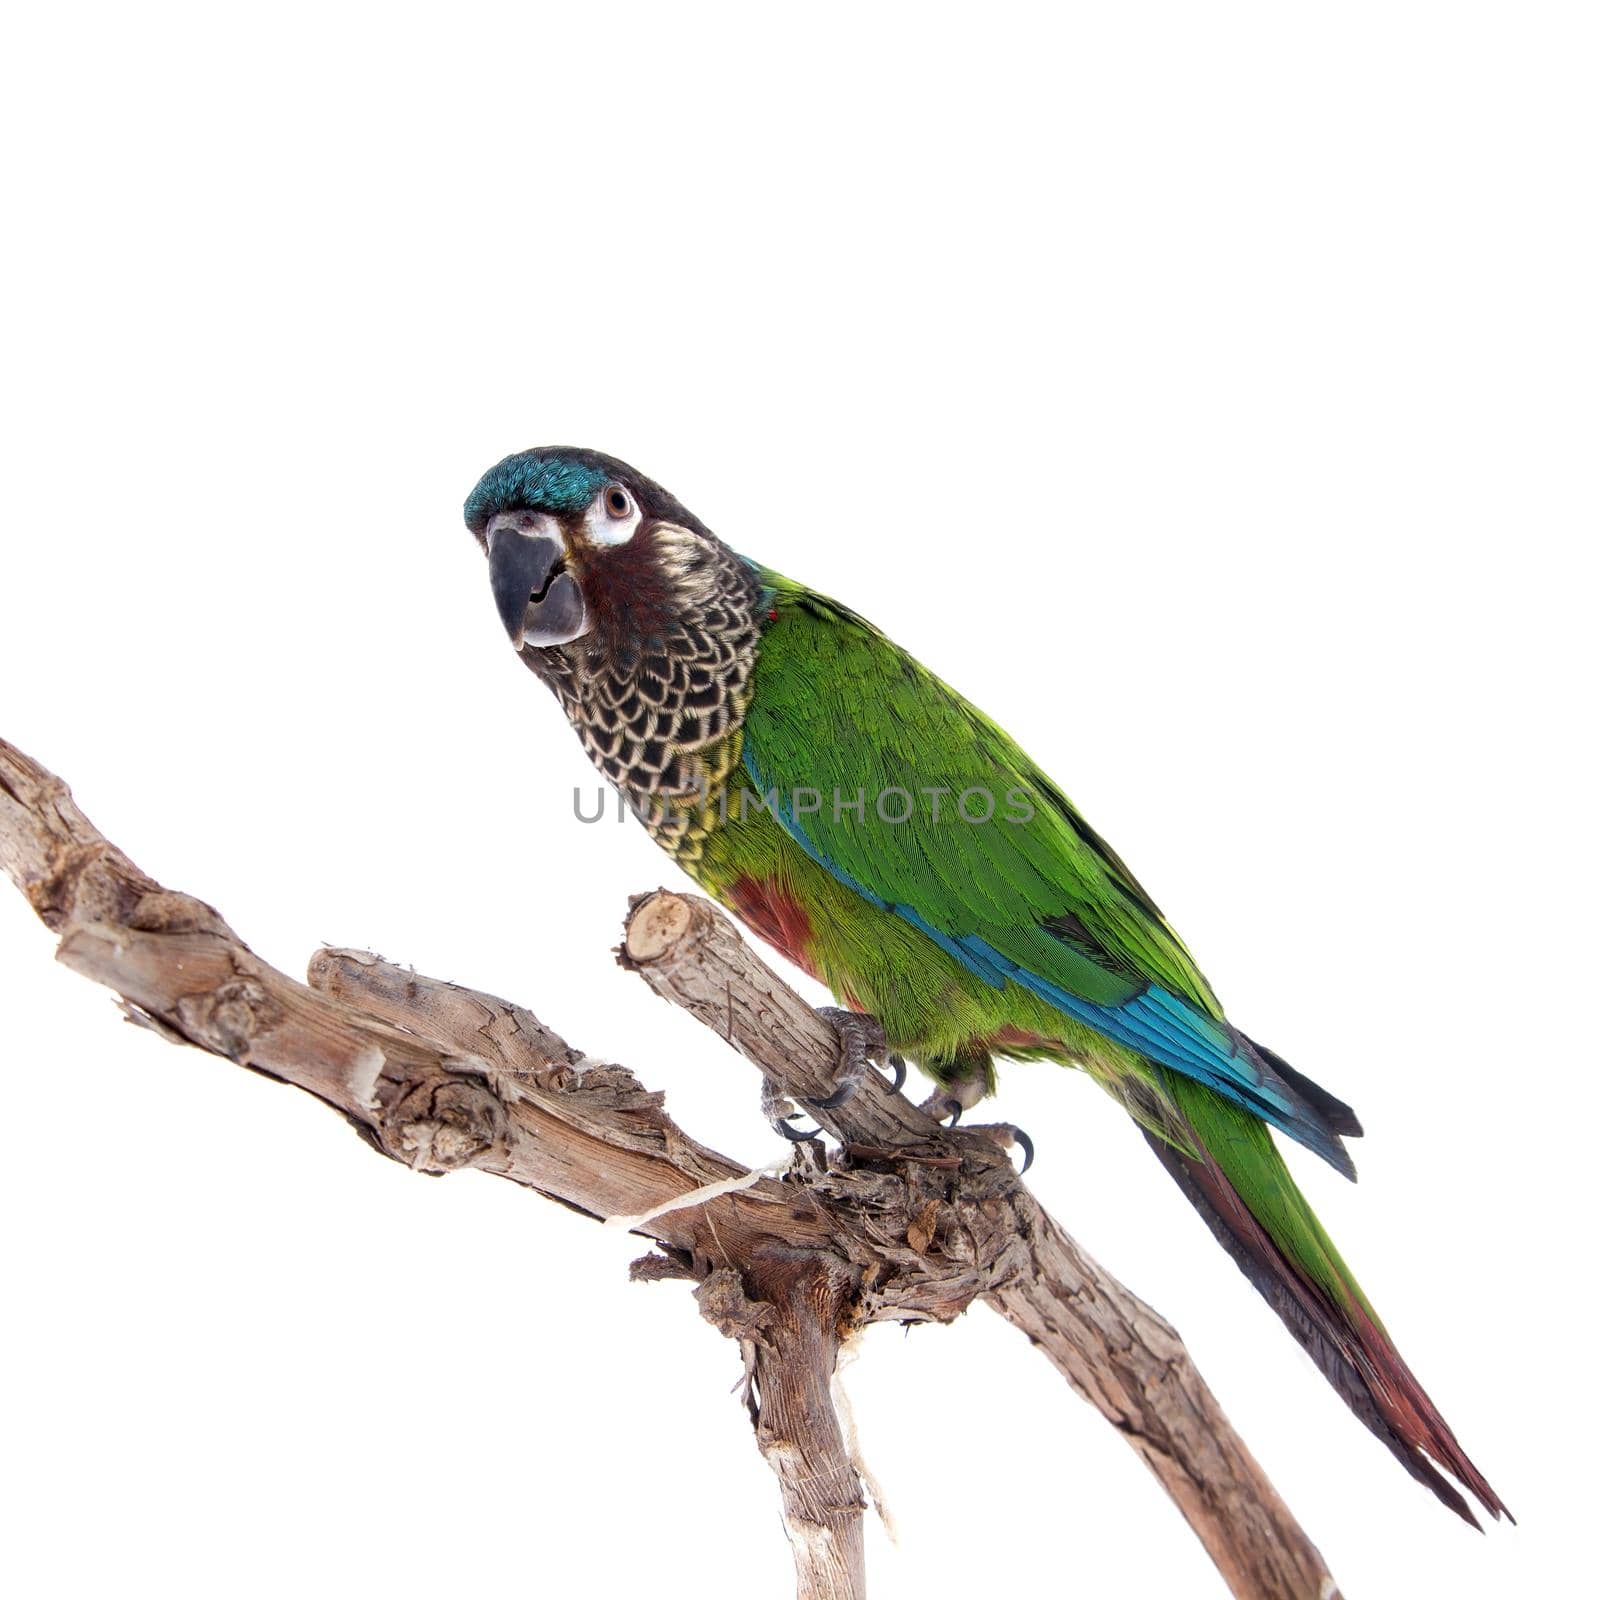 The painted conure, pyrrhura picta, isolated on white background